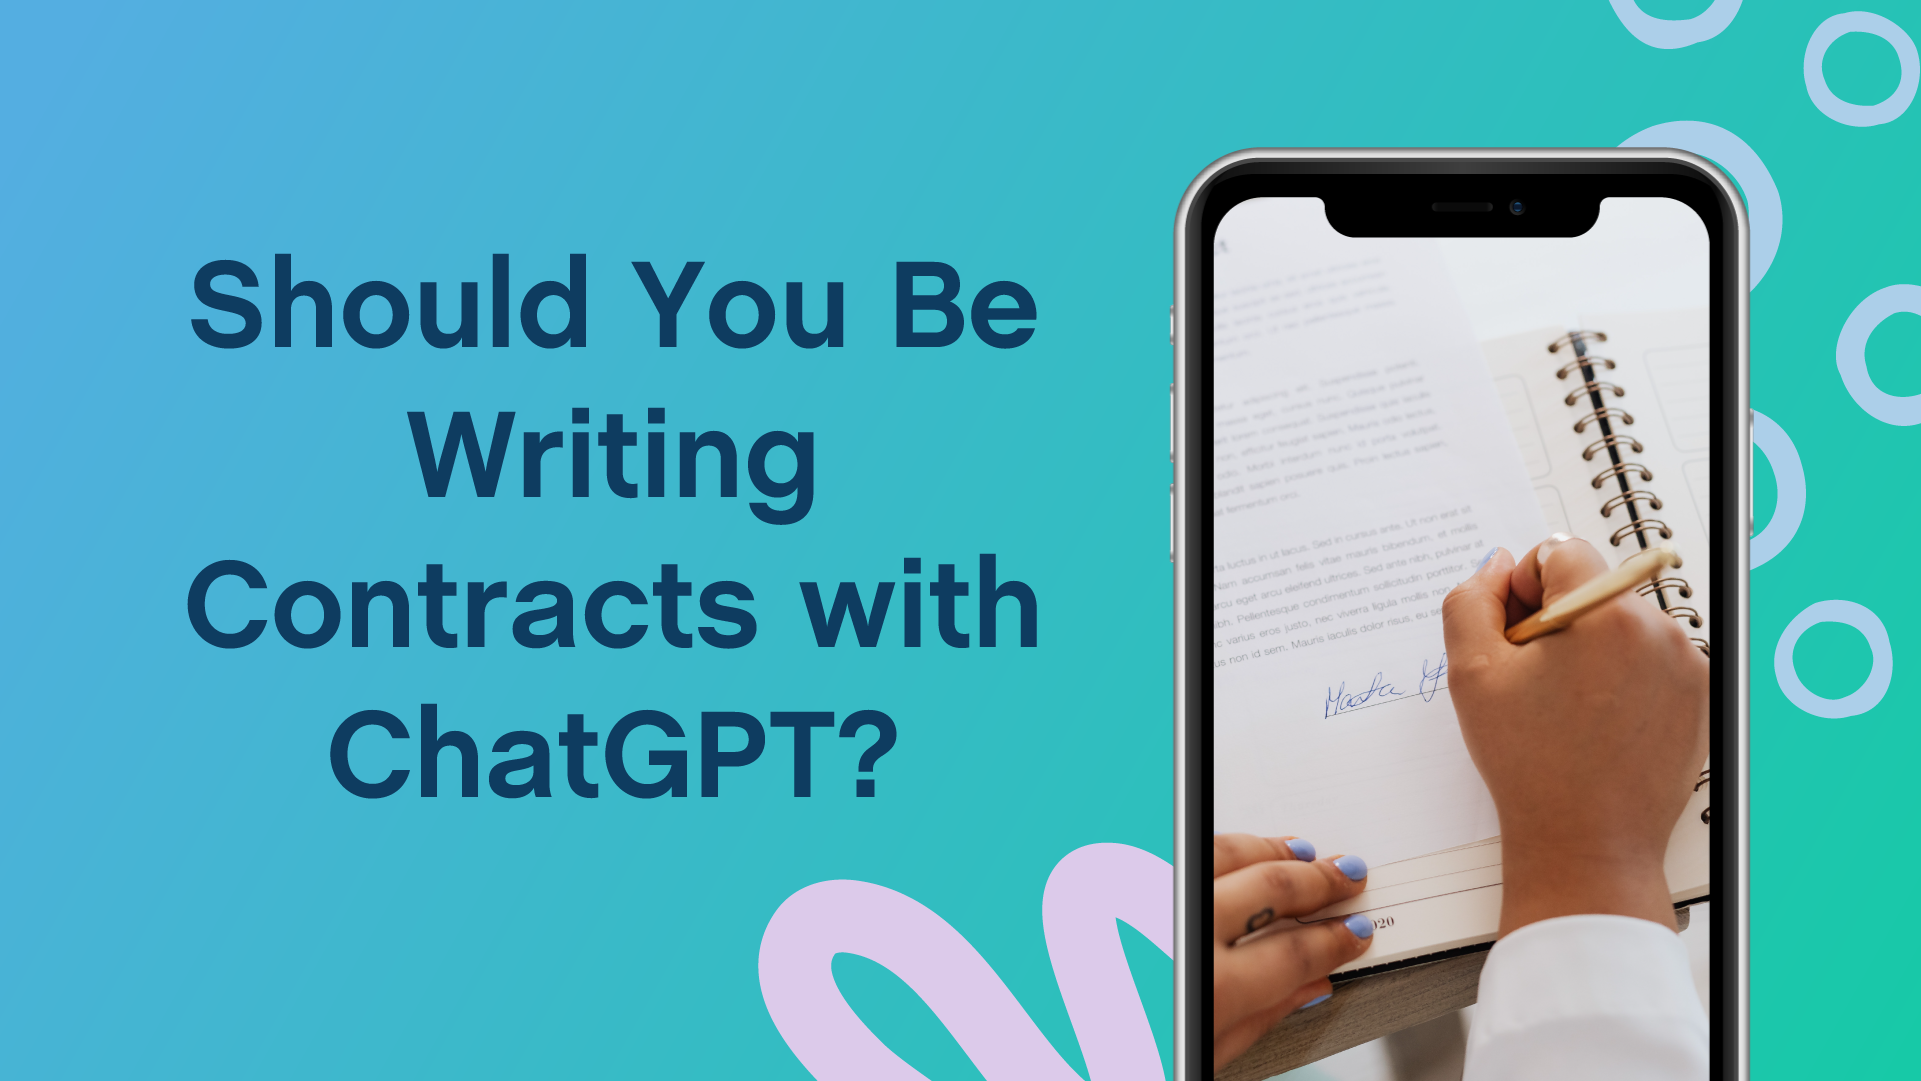 Should You Be Writing Contracts with ChatGPT?